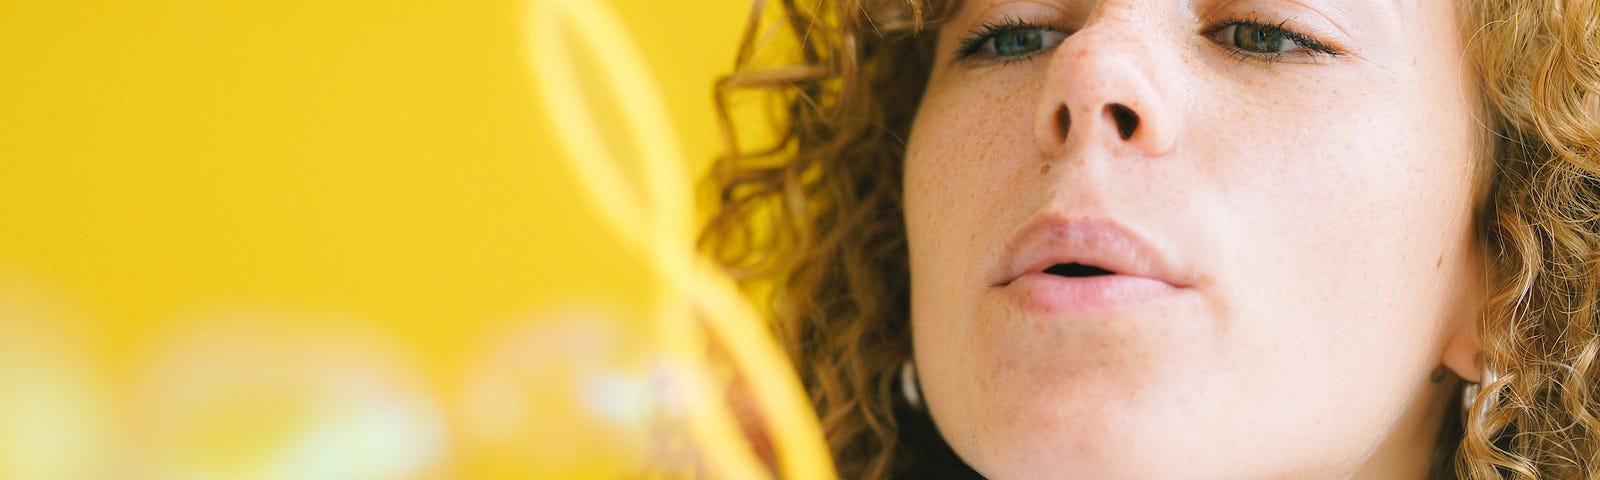 Adult woman blowing bubbles against yellow background.